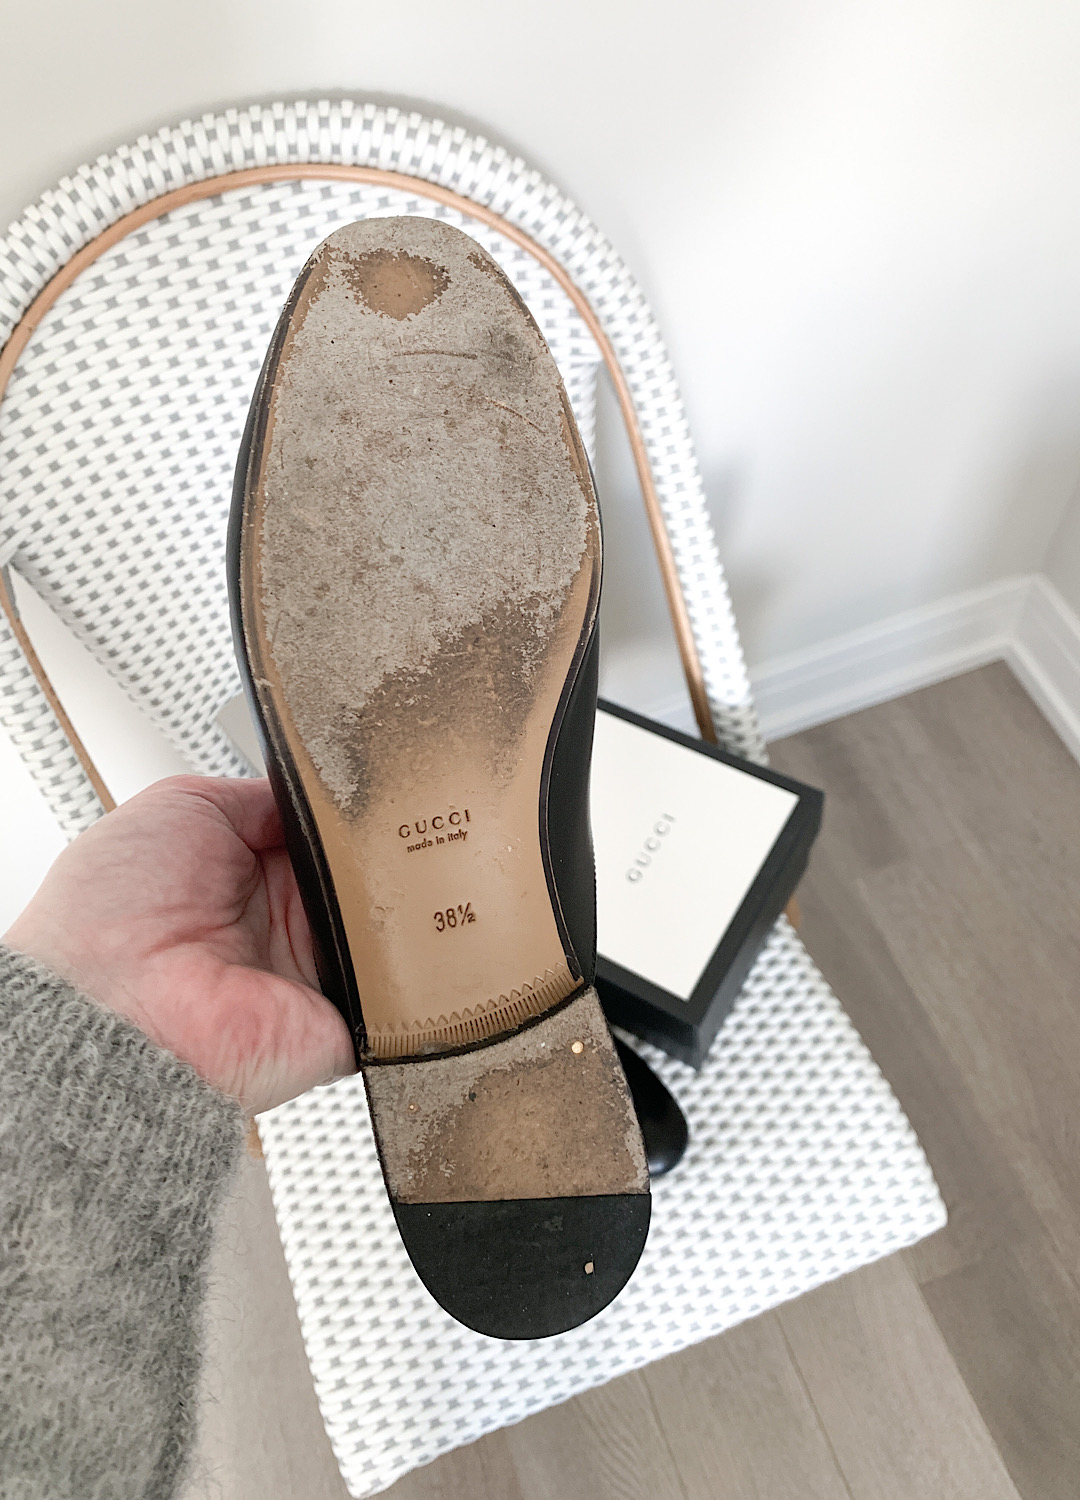 Gucci Princetown Mules Review - Cashmere & Jeans